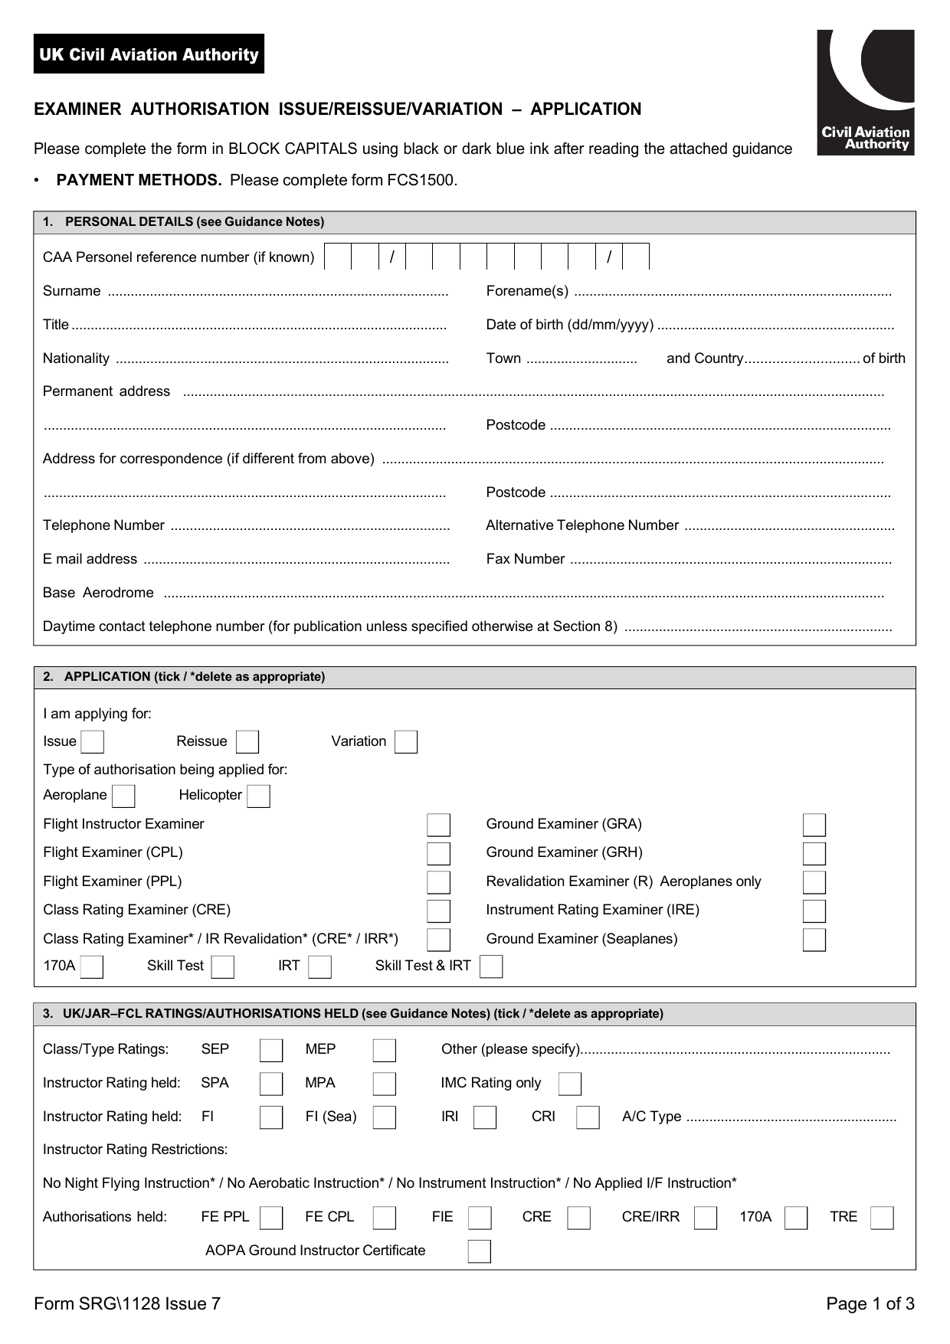 Form SRG 1128 Examiner Authorisation Issue / Reissue / Variation - Application - United Kingdom, Page 1